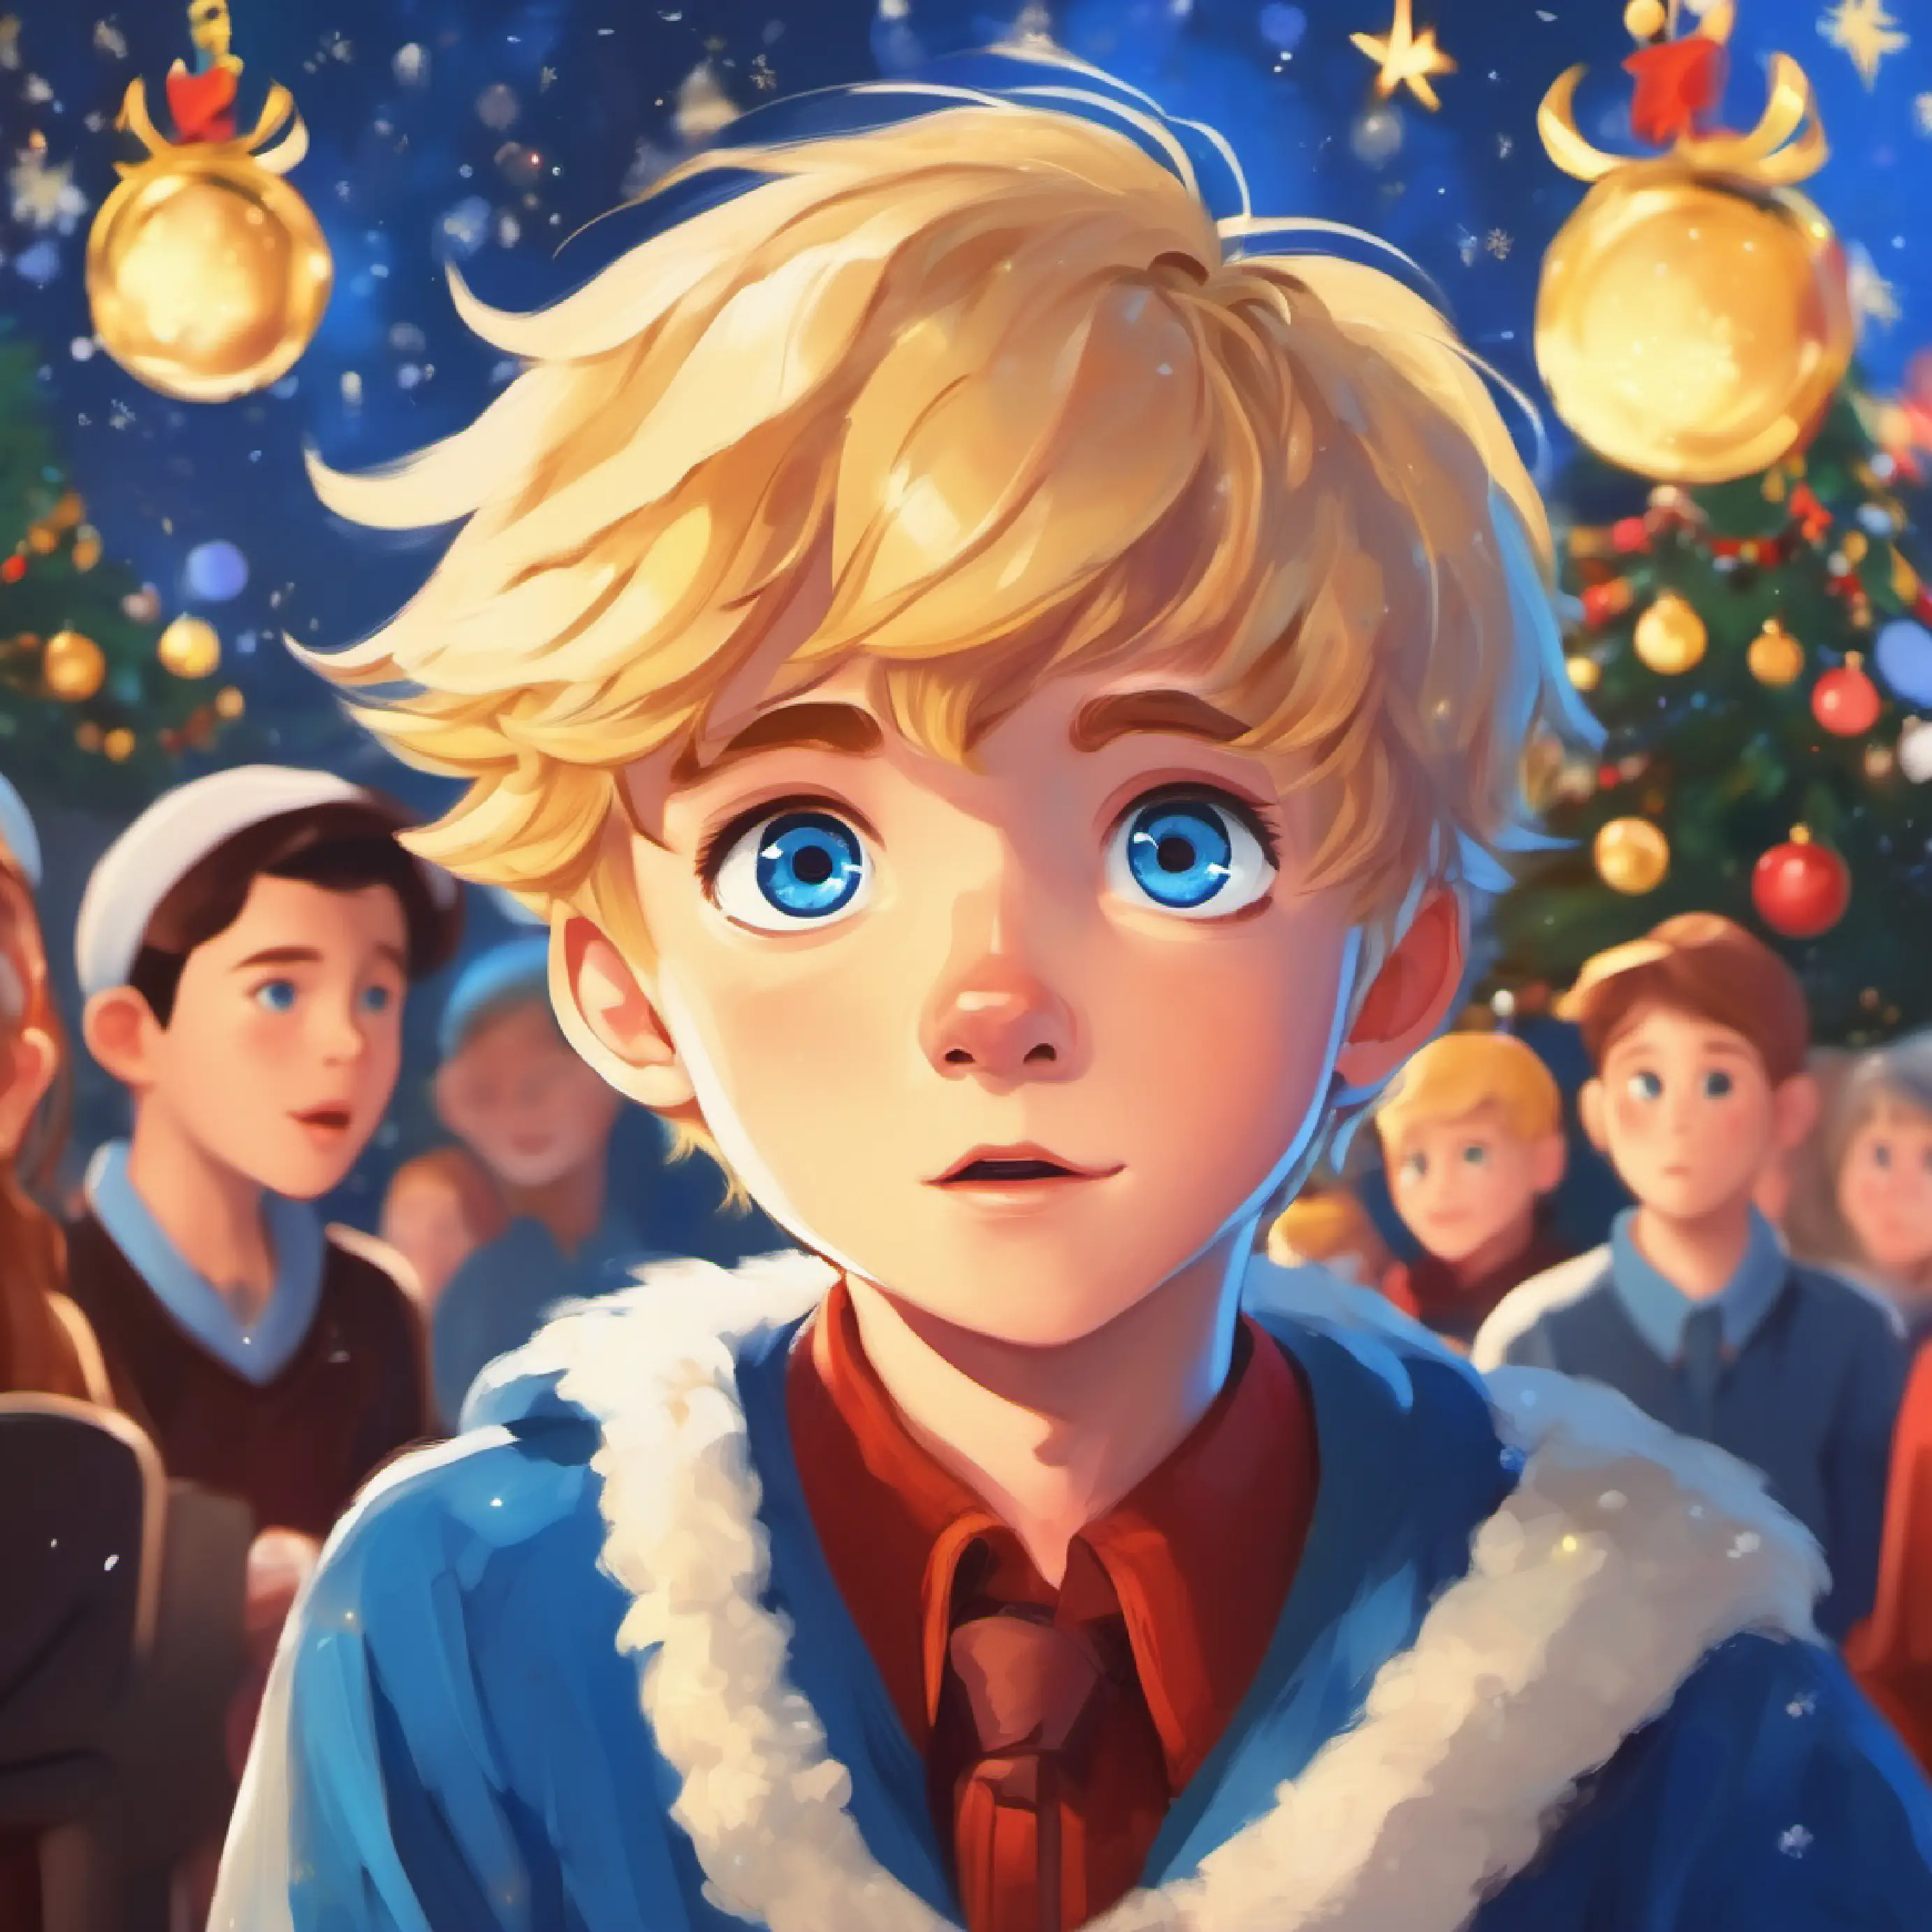 Bright-eyed, golden-haired boy, blue eyes, joyful refusing to share, classmates confused, tension.